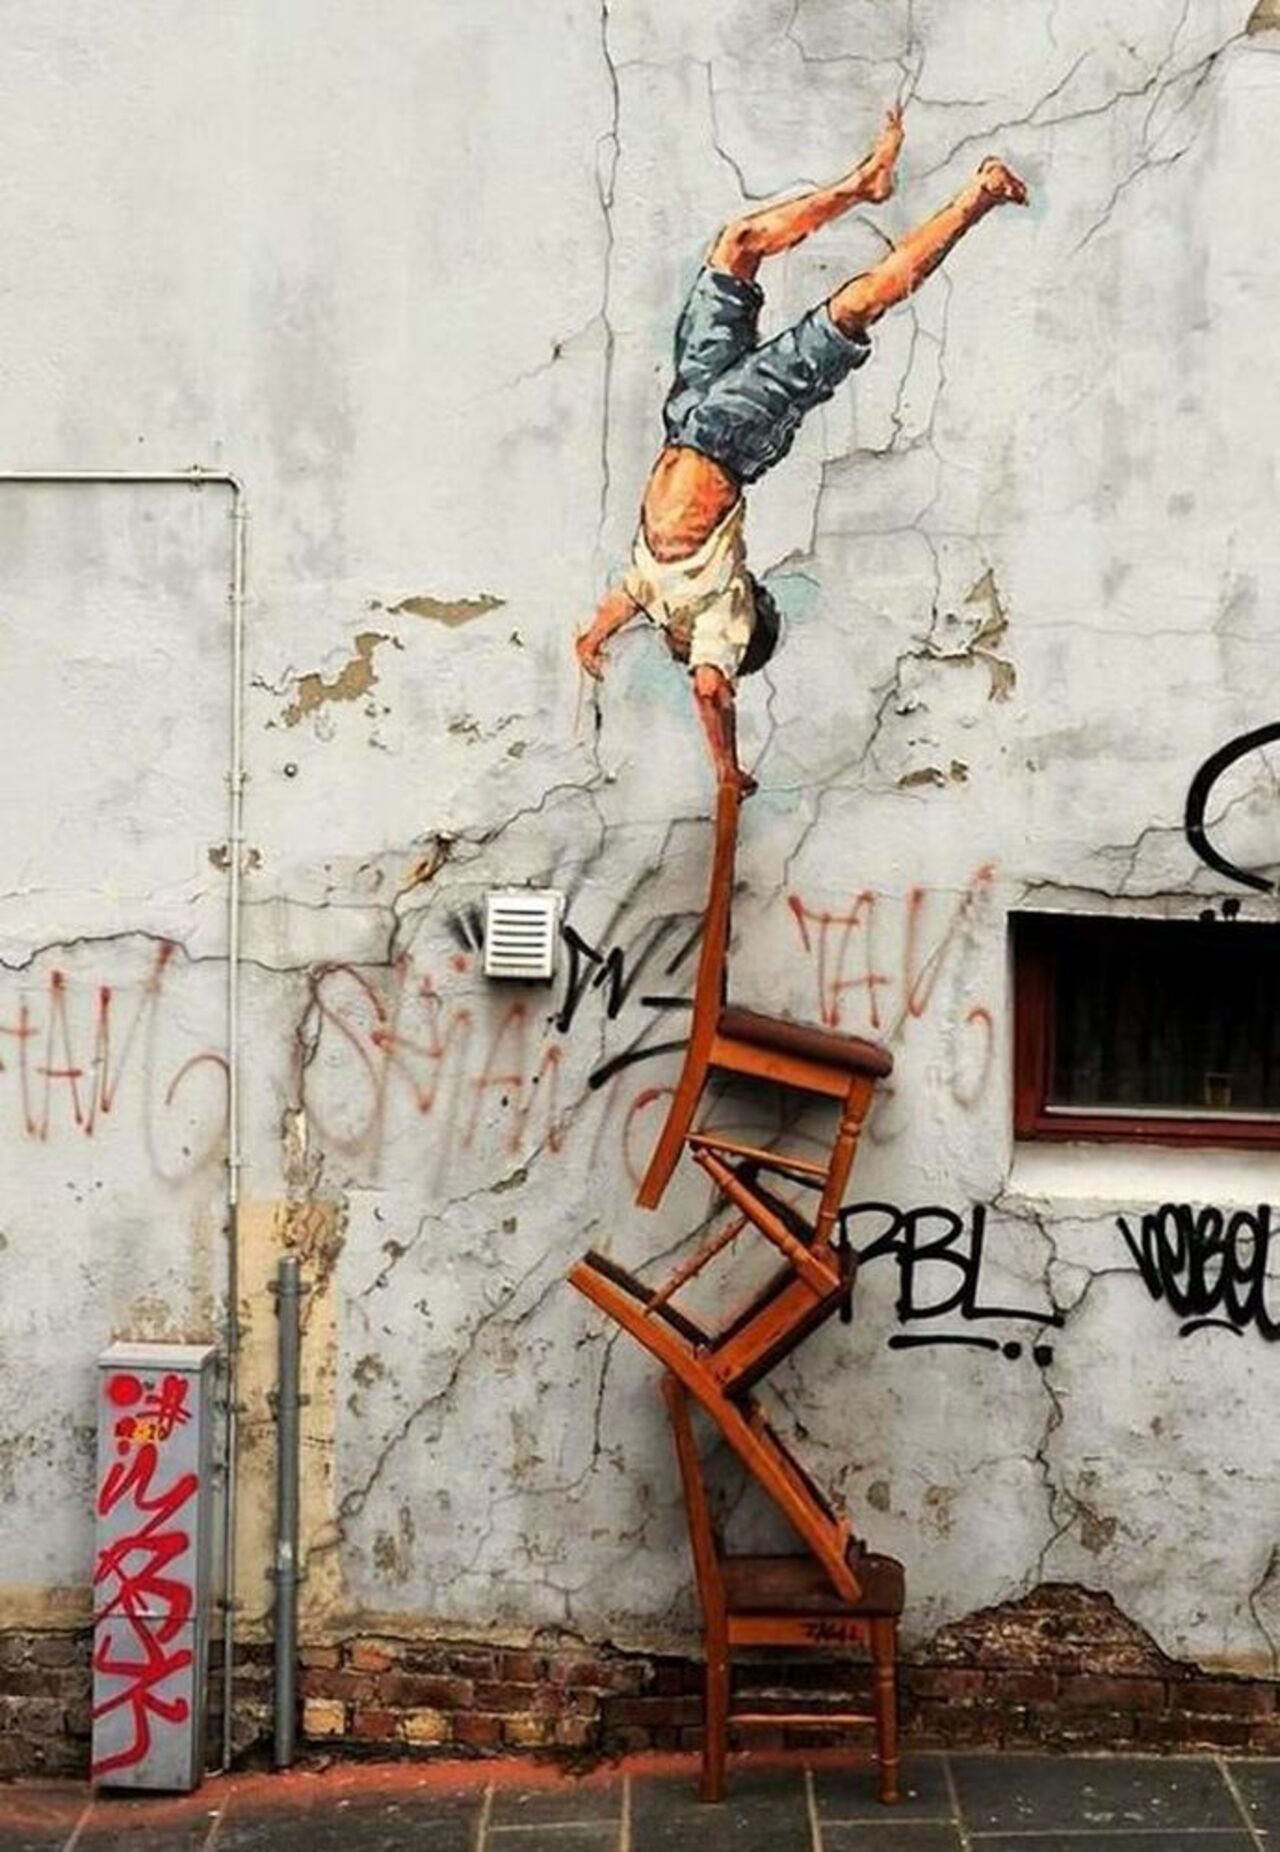 #StreetArtSaturday Balance is #3D #Streetart using a painting and some old chairs. https://t.co/Uu7Y8CYdJt